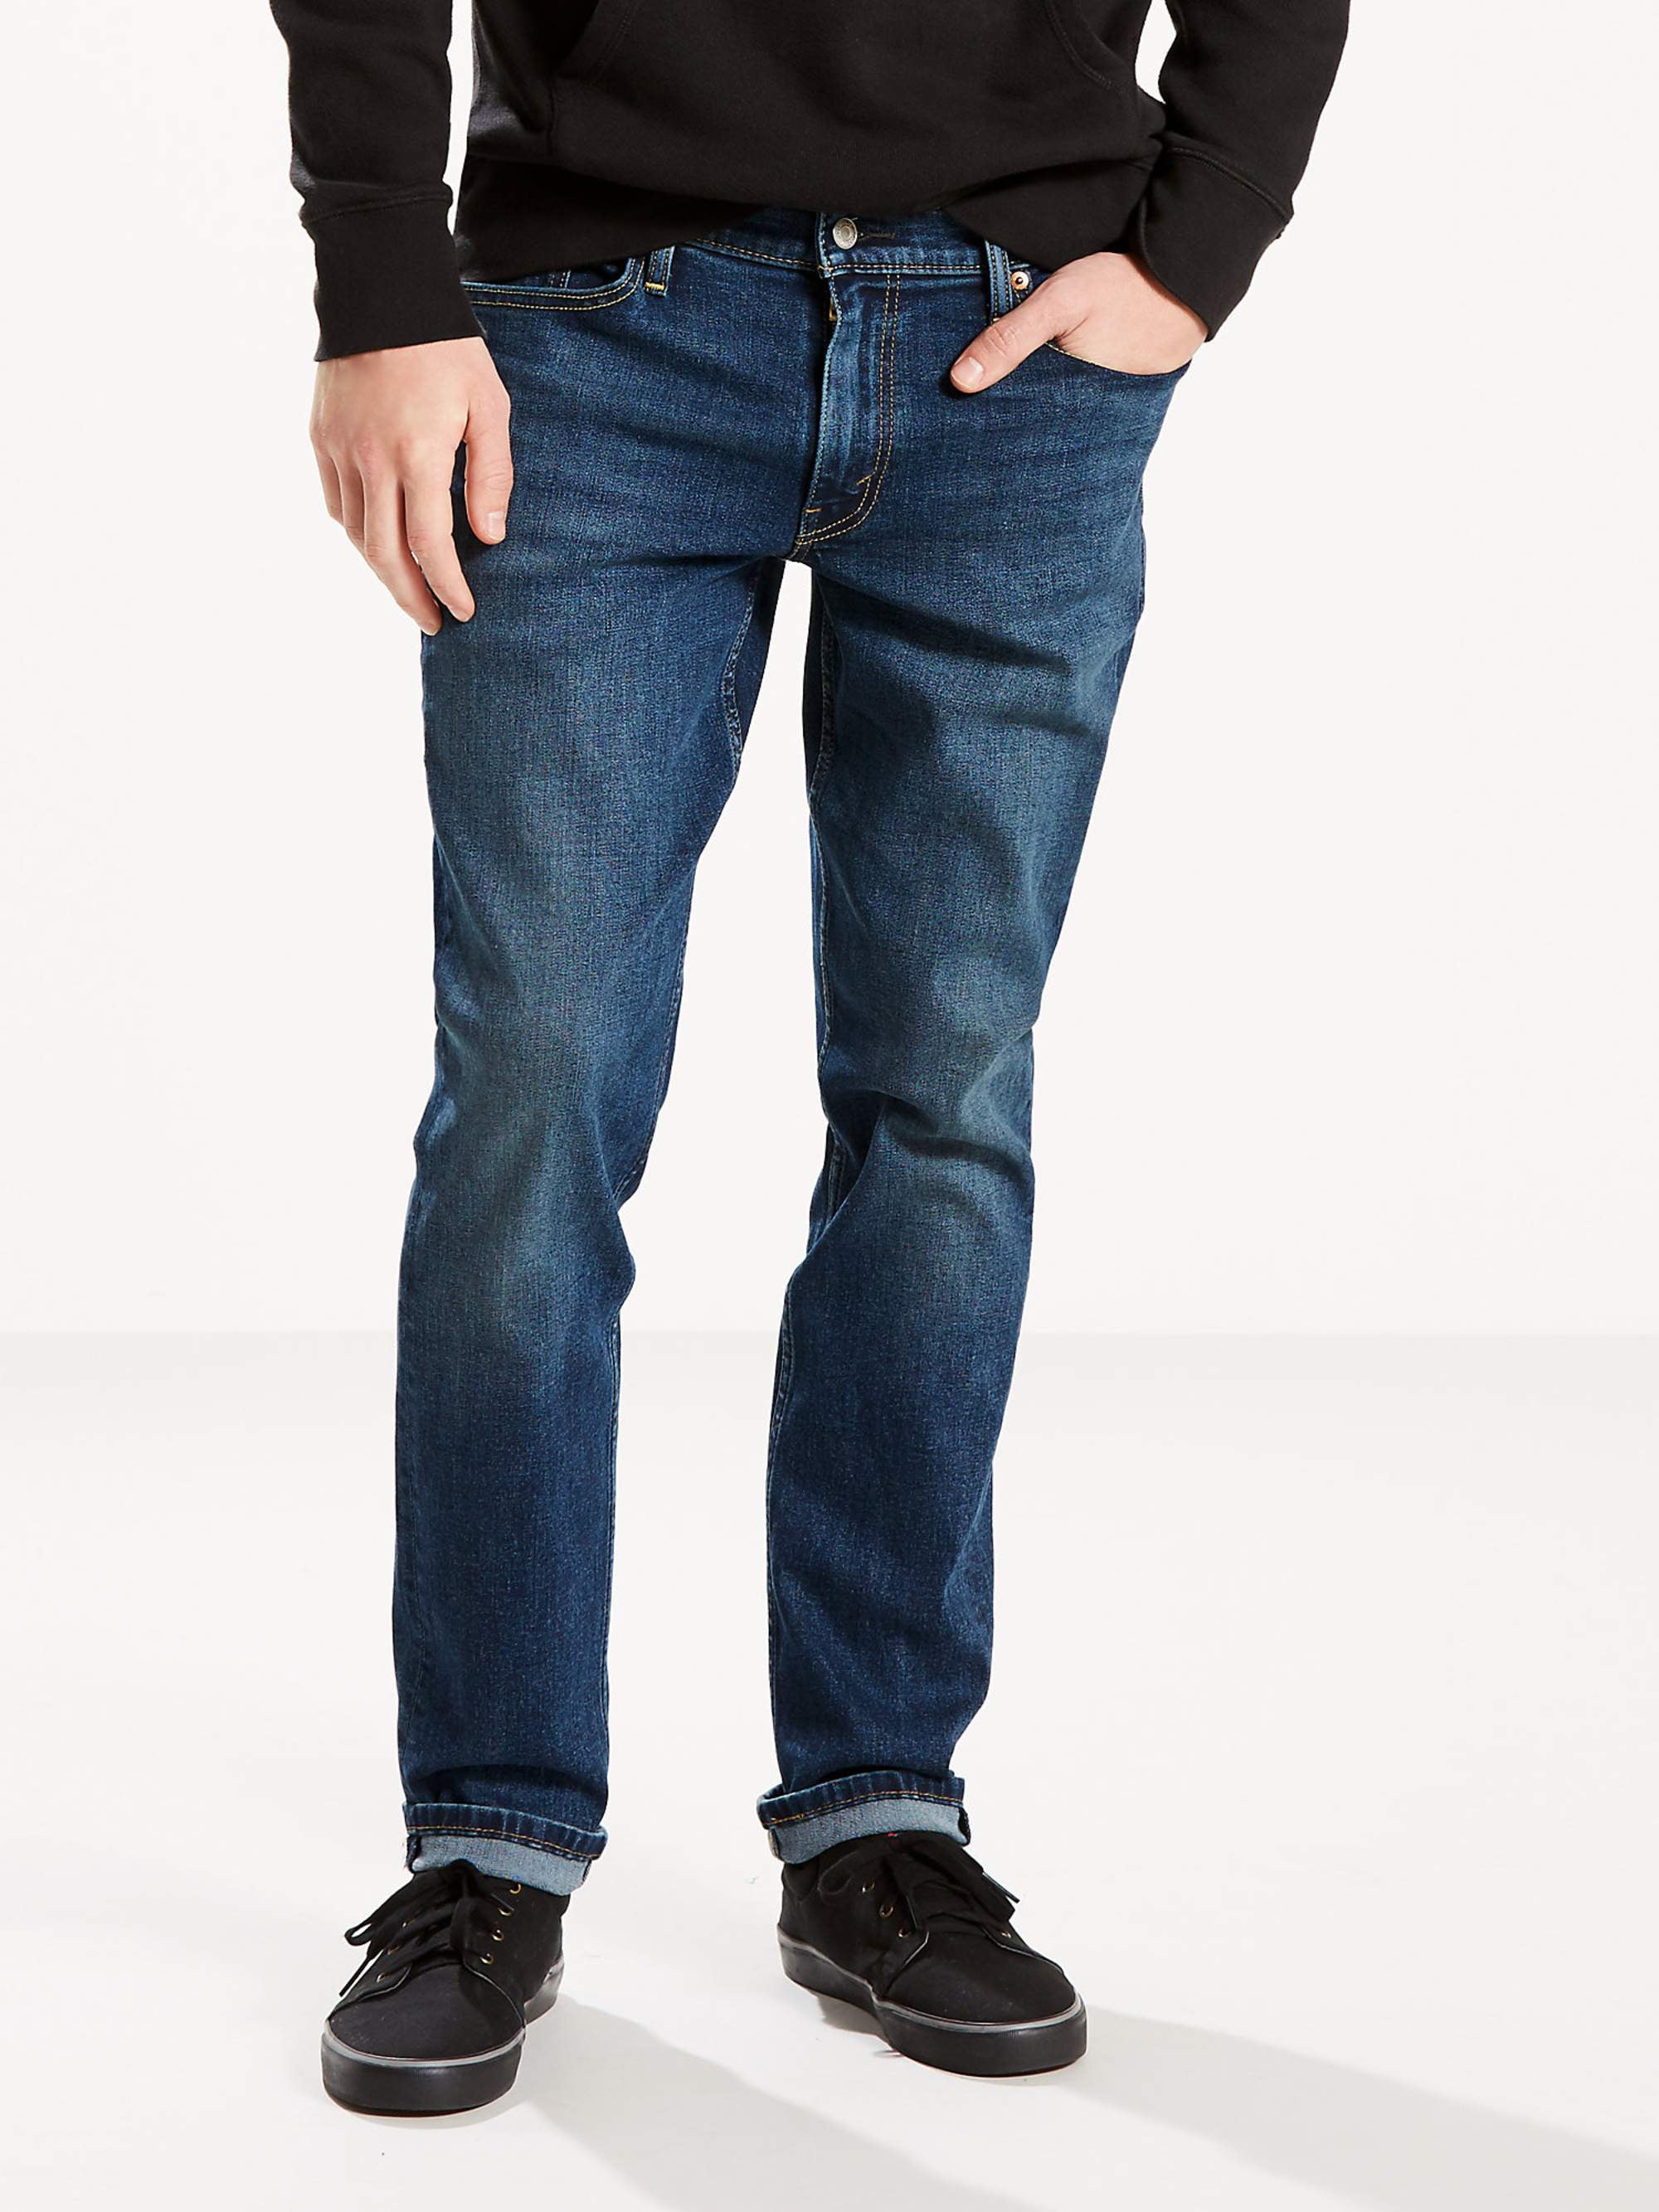 04511-2988 Levi's 511 Men Slim FIT  Jeans W:29 to 36 L:30 to 34 